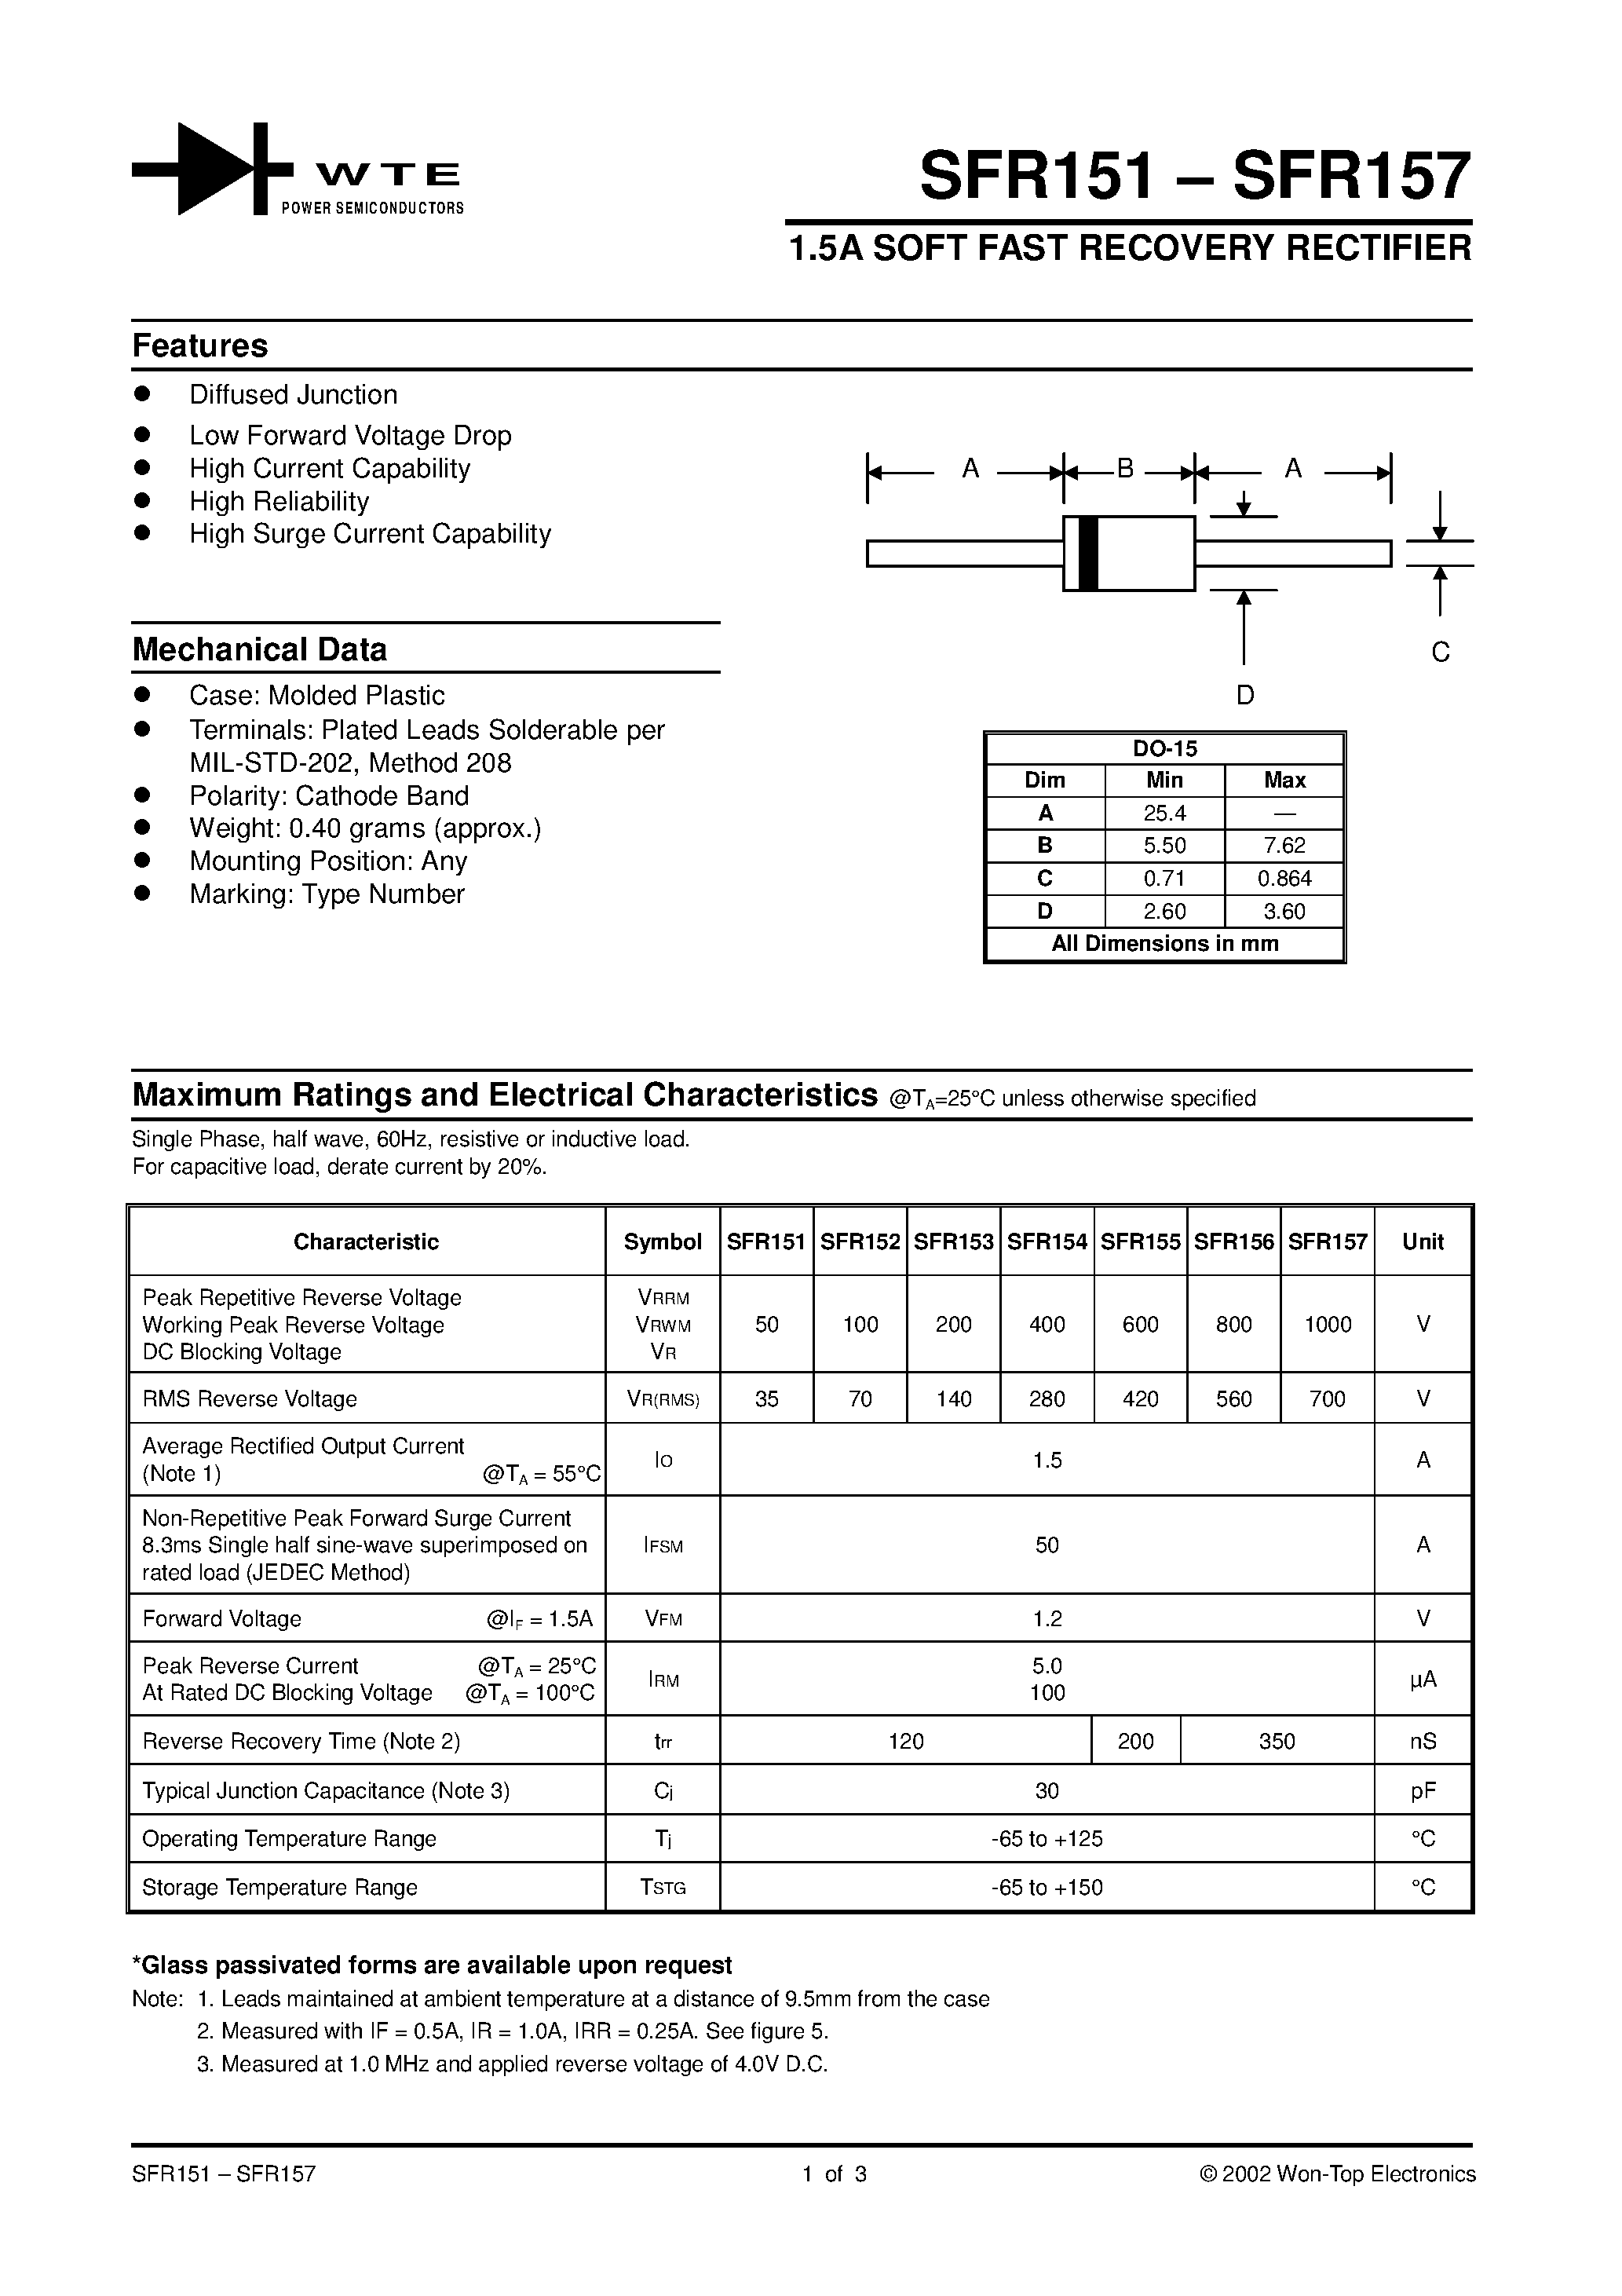 Datasheet SFR151 - 1.5A SOFT FAST RECOVERY RECTIFIER page 1